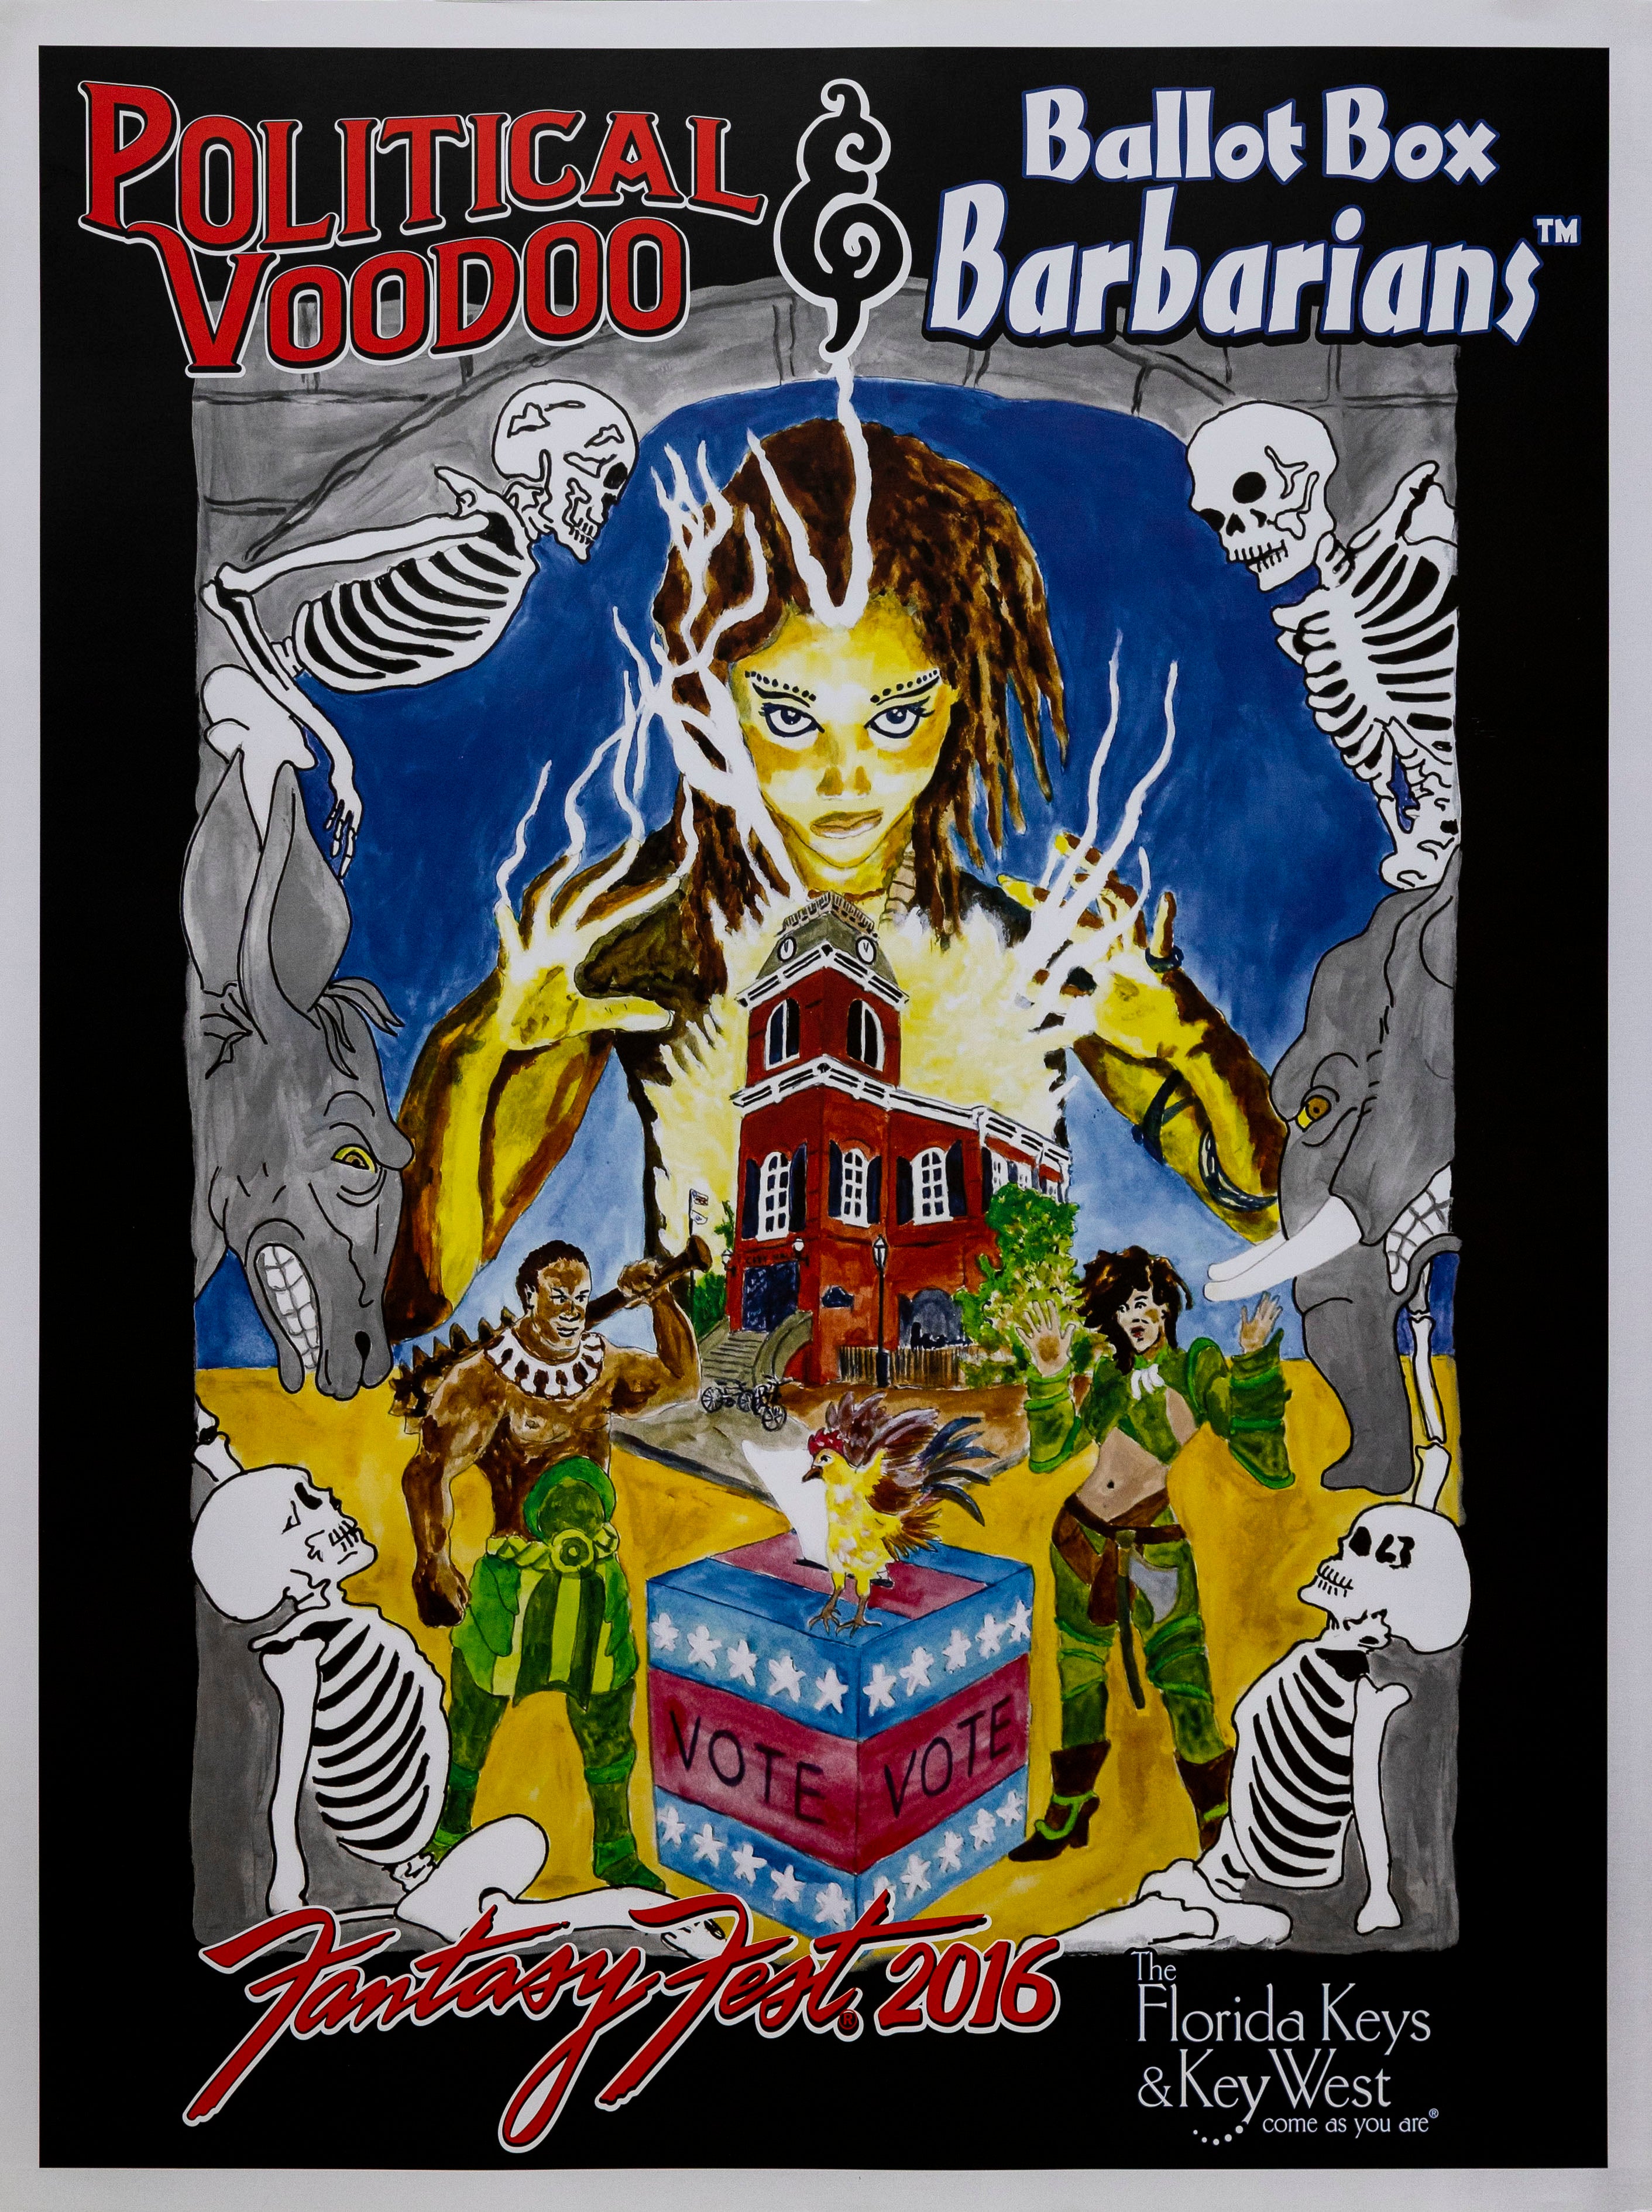 Official 2016 Fantasy Fest Poster Political Voodoo & Ballot Box Barbarians by Jane Rohrschneider